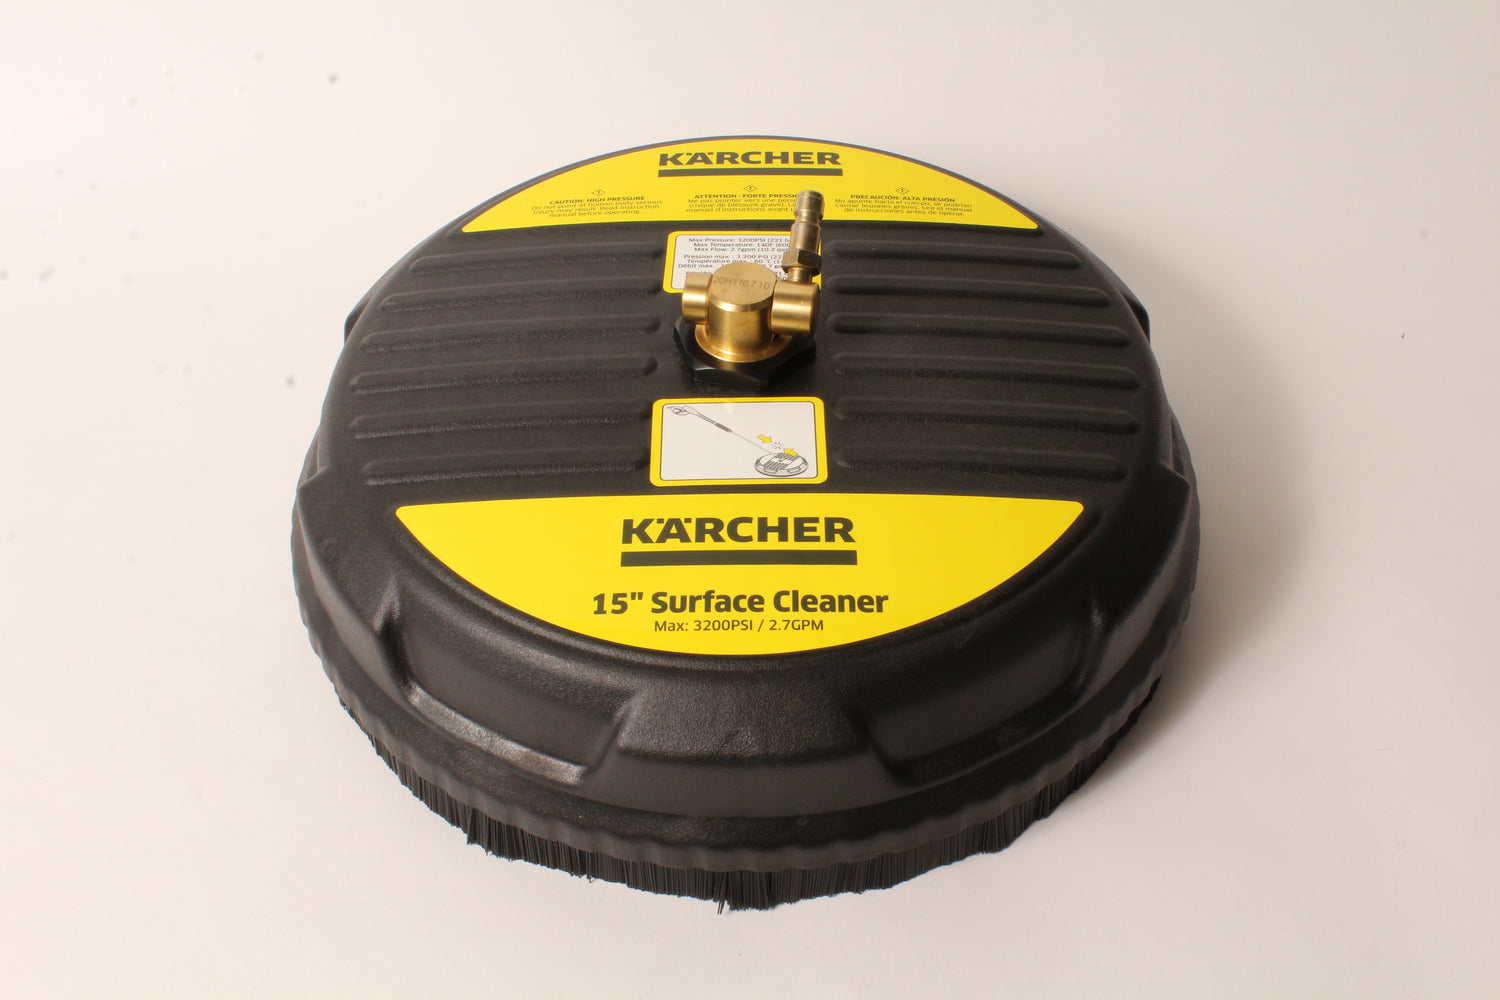 Karcher 8.641-035.0 15" Pressure Washer Surface Cleaner Attachment 3200PSI OEM